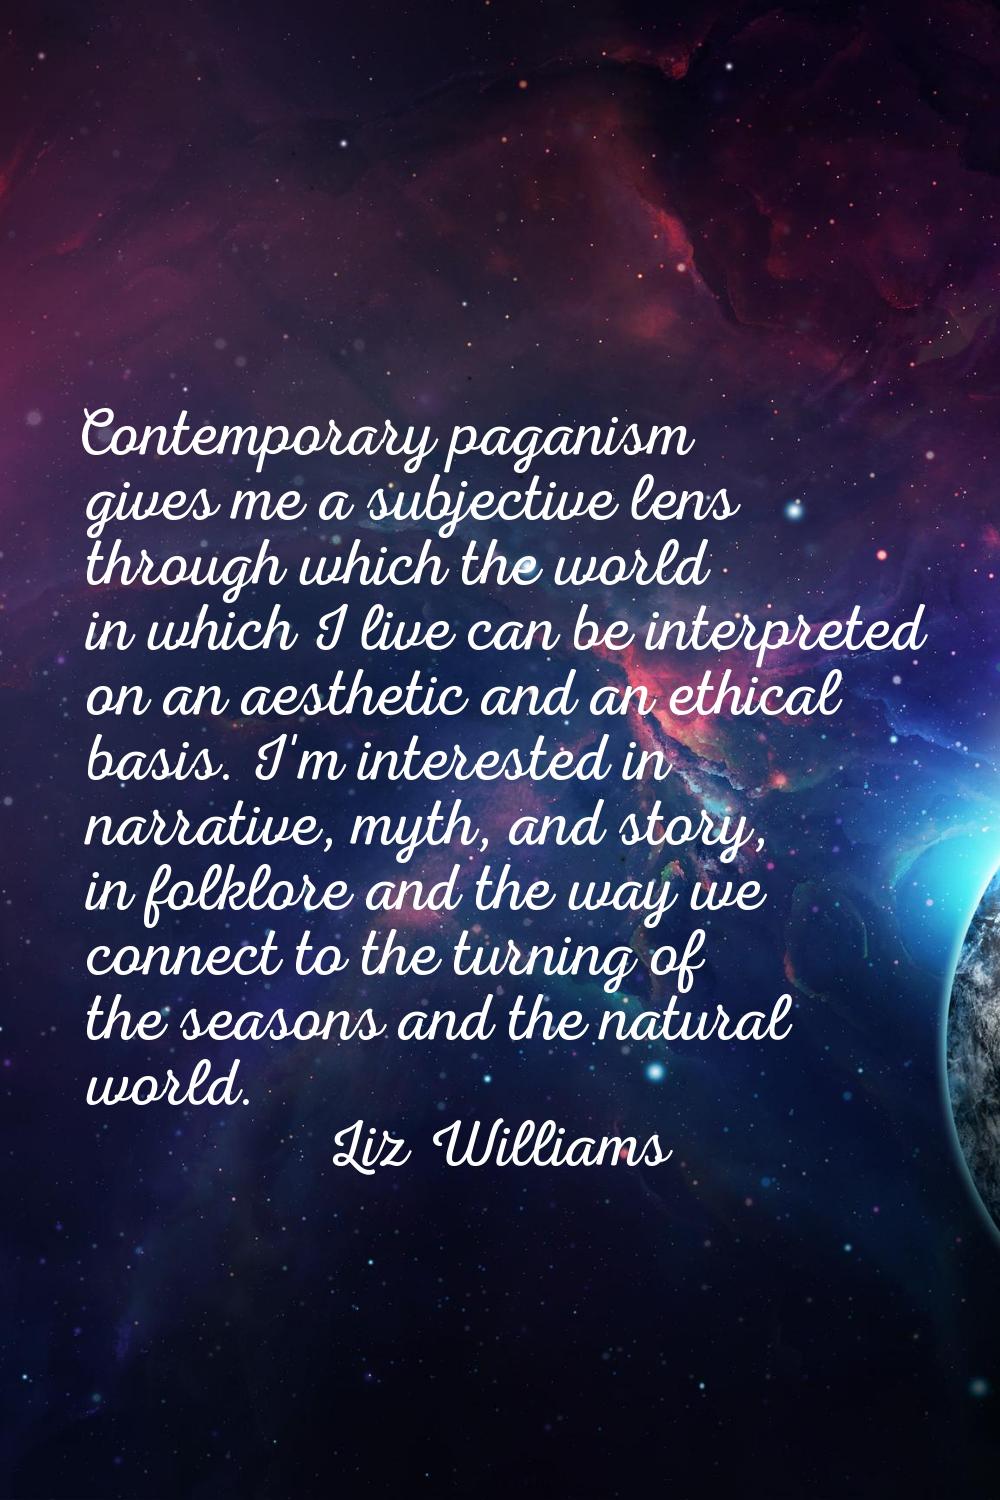 Contemporary paganism gives me a subjective lens through which the world in which I live can be int